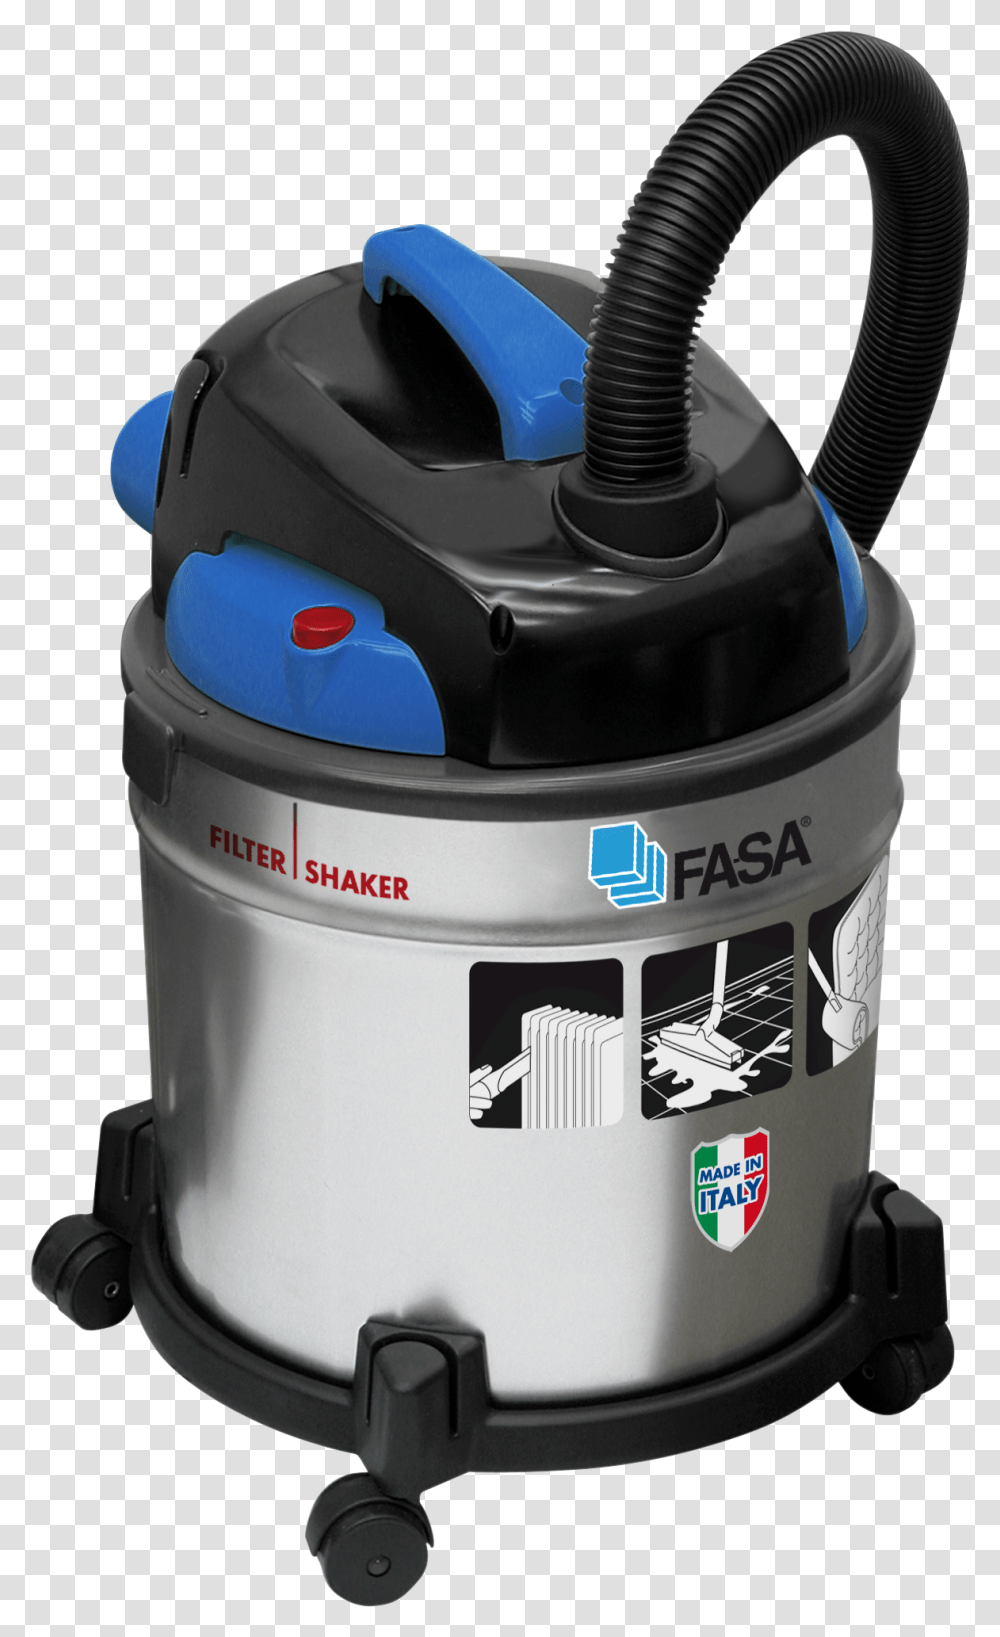 Fasa Ws 20 Aspirateur Fasa, Appliance, Vacuum Cleaner, Helmet, Clothing Transparent Png